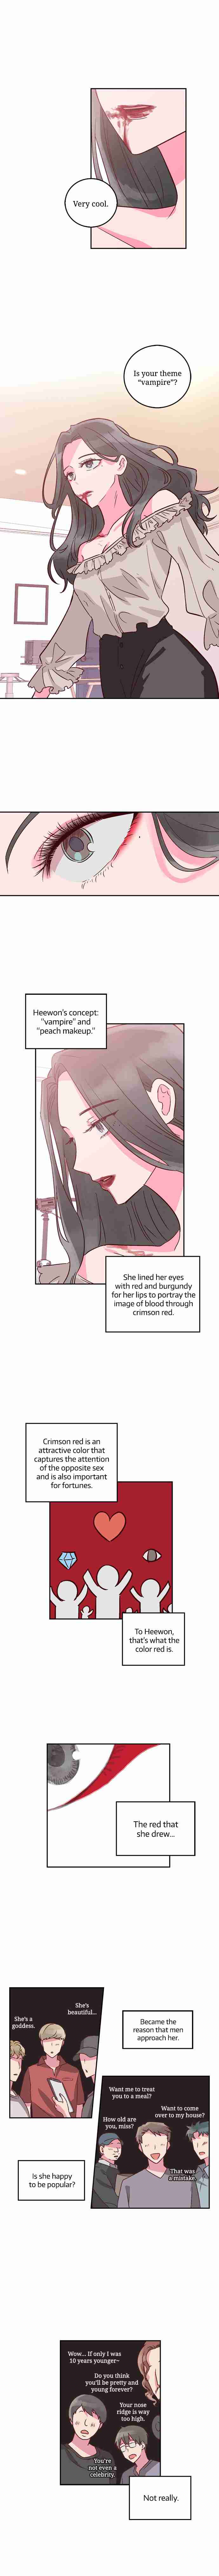 The Man Who Cleans Up Makeup Ch. 27